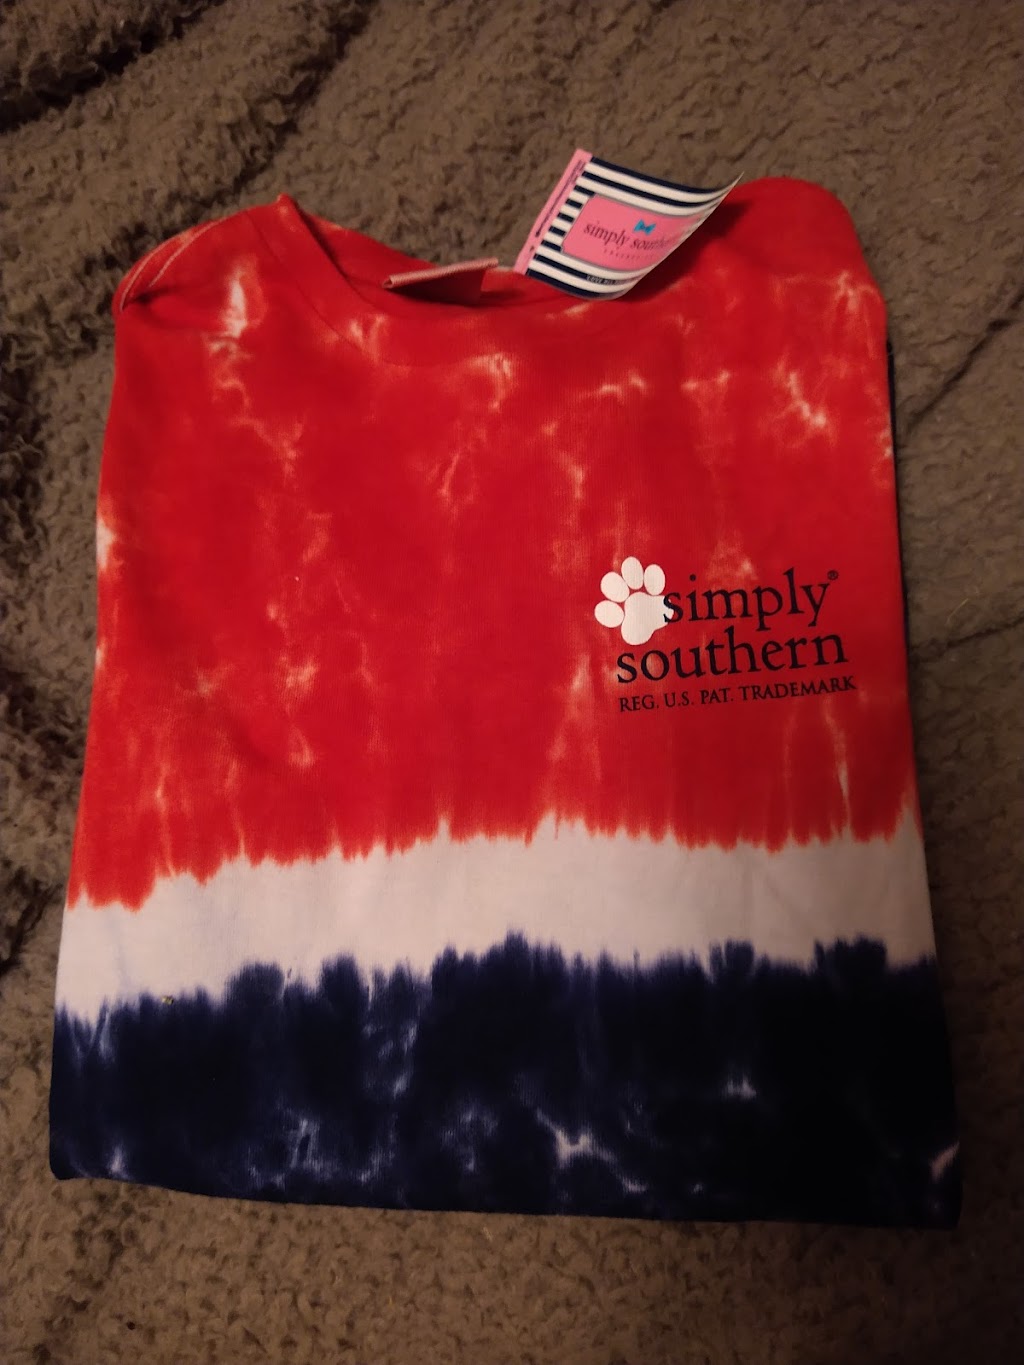 Simply Southern | 1155 Buck Creek Rd Suite 204, Simpsonville, KY 40067 | Phone: (502) 405-3093